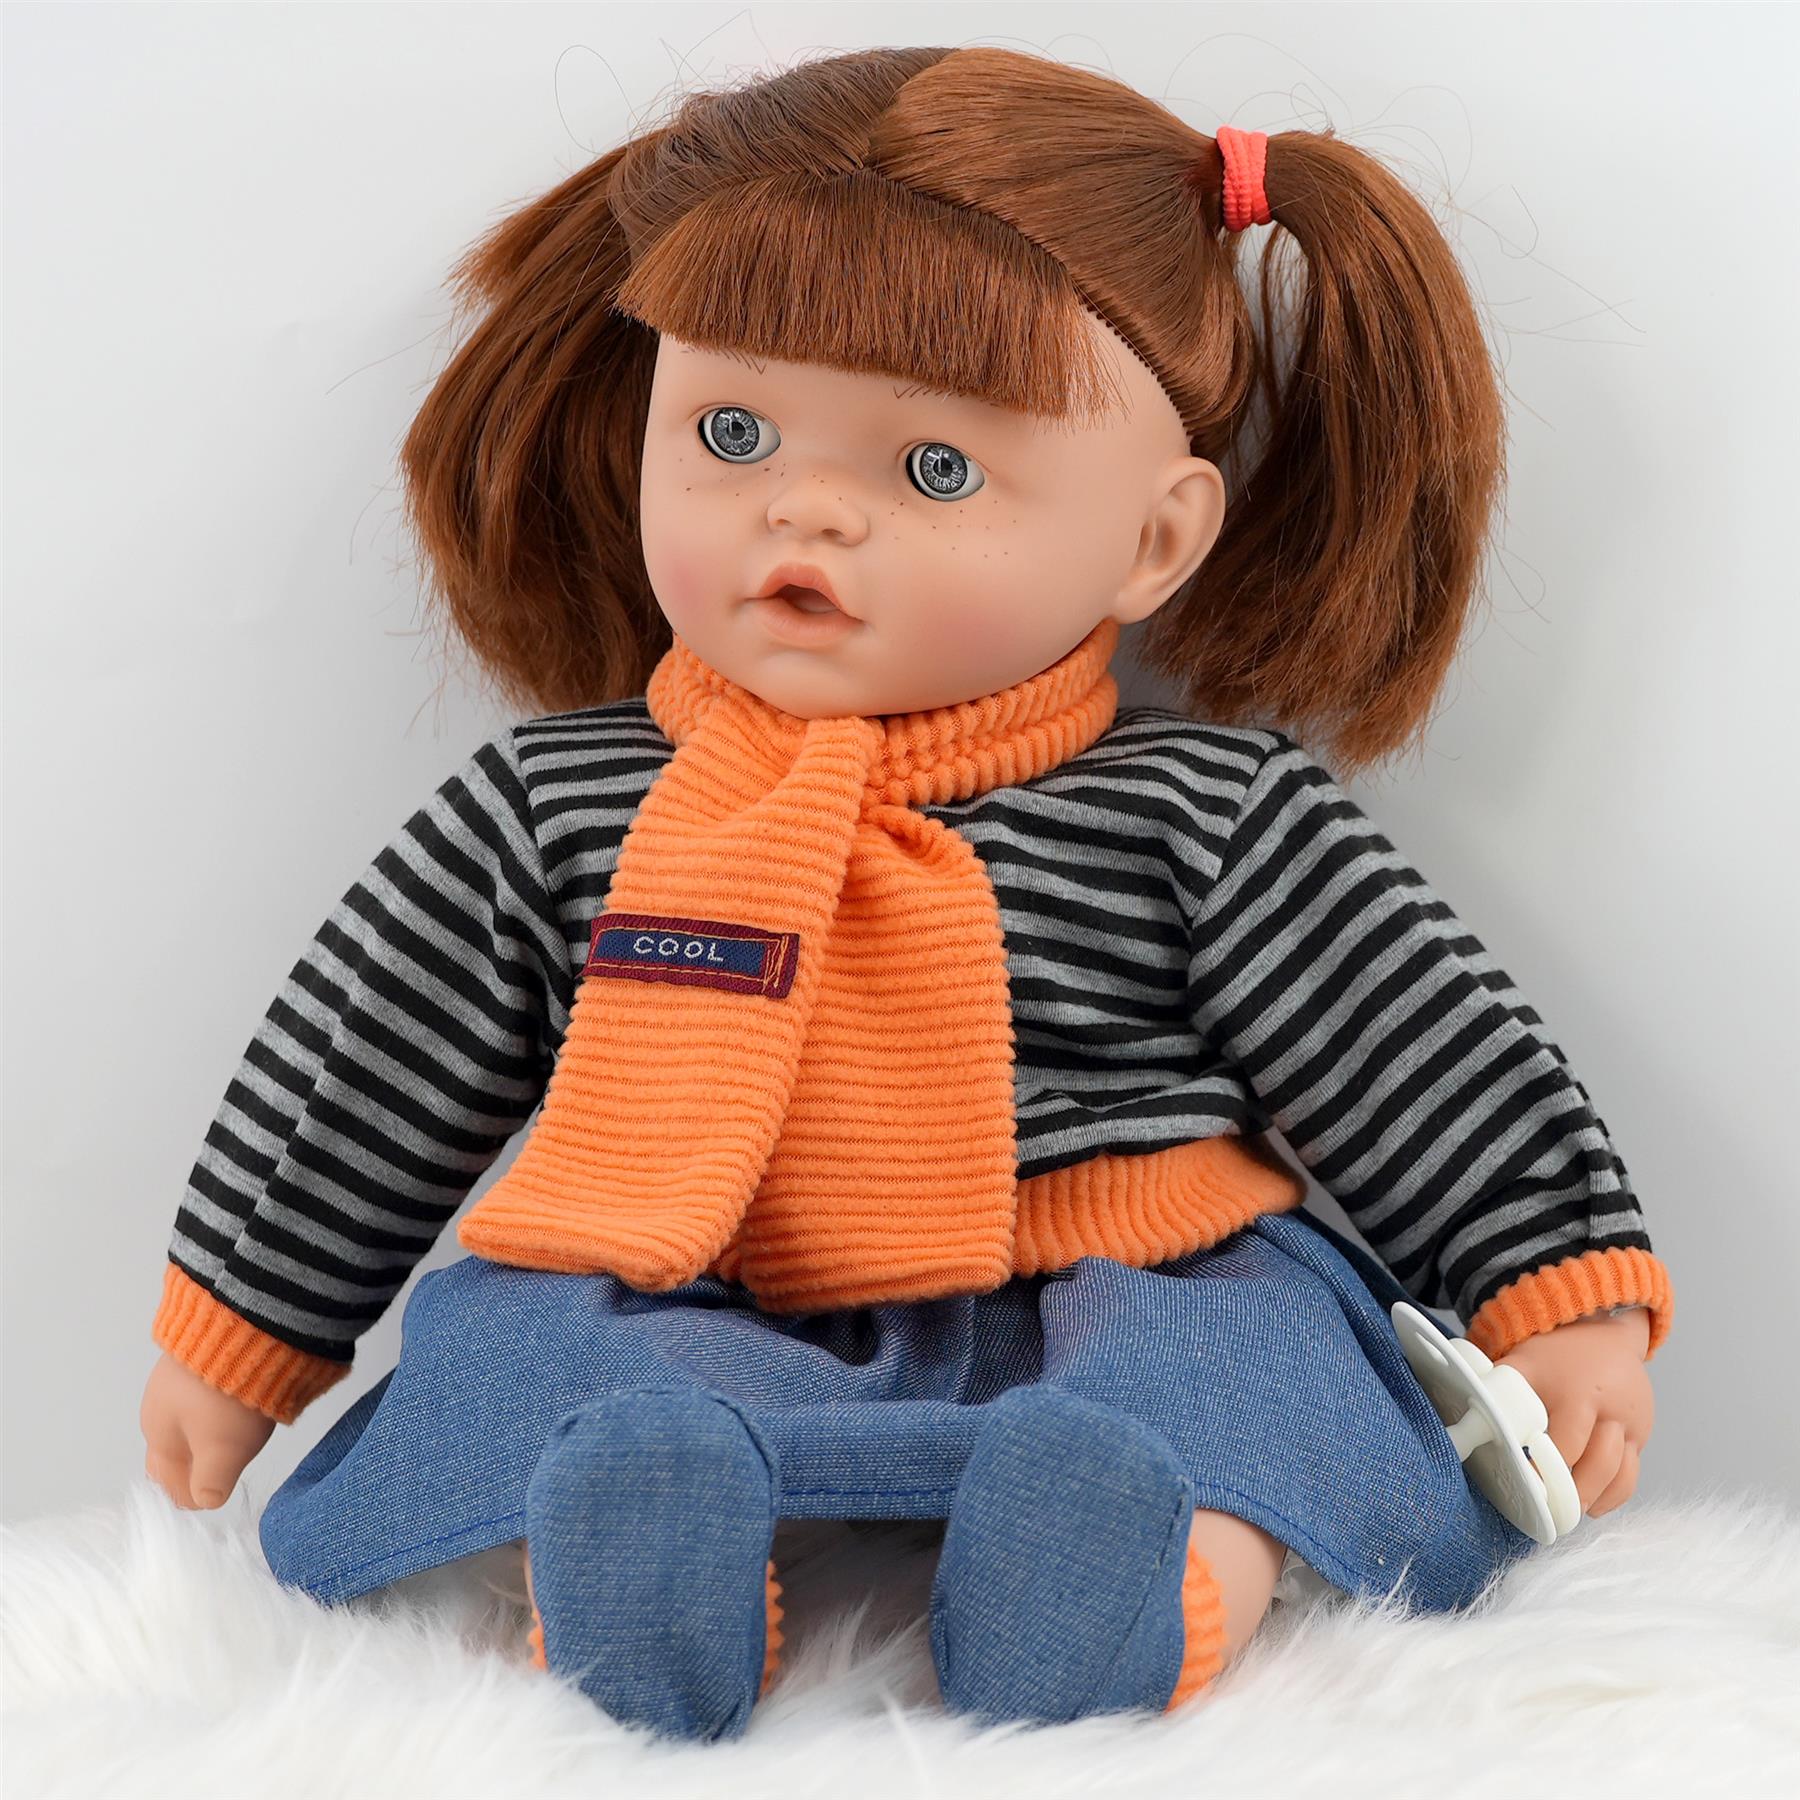 Sleeping Ginger Girl Dolls with Dummy & Sounds by BiBi Doll - The Magic Toy Shop